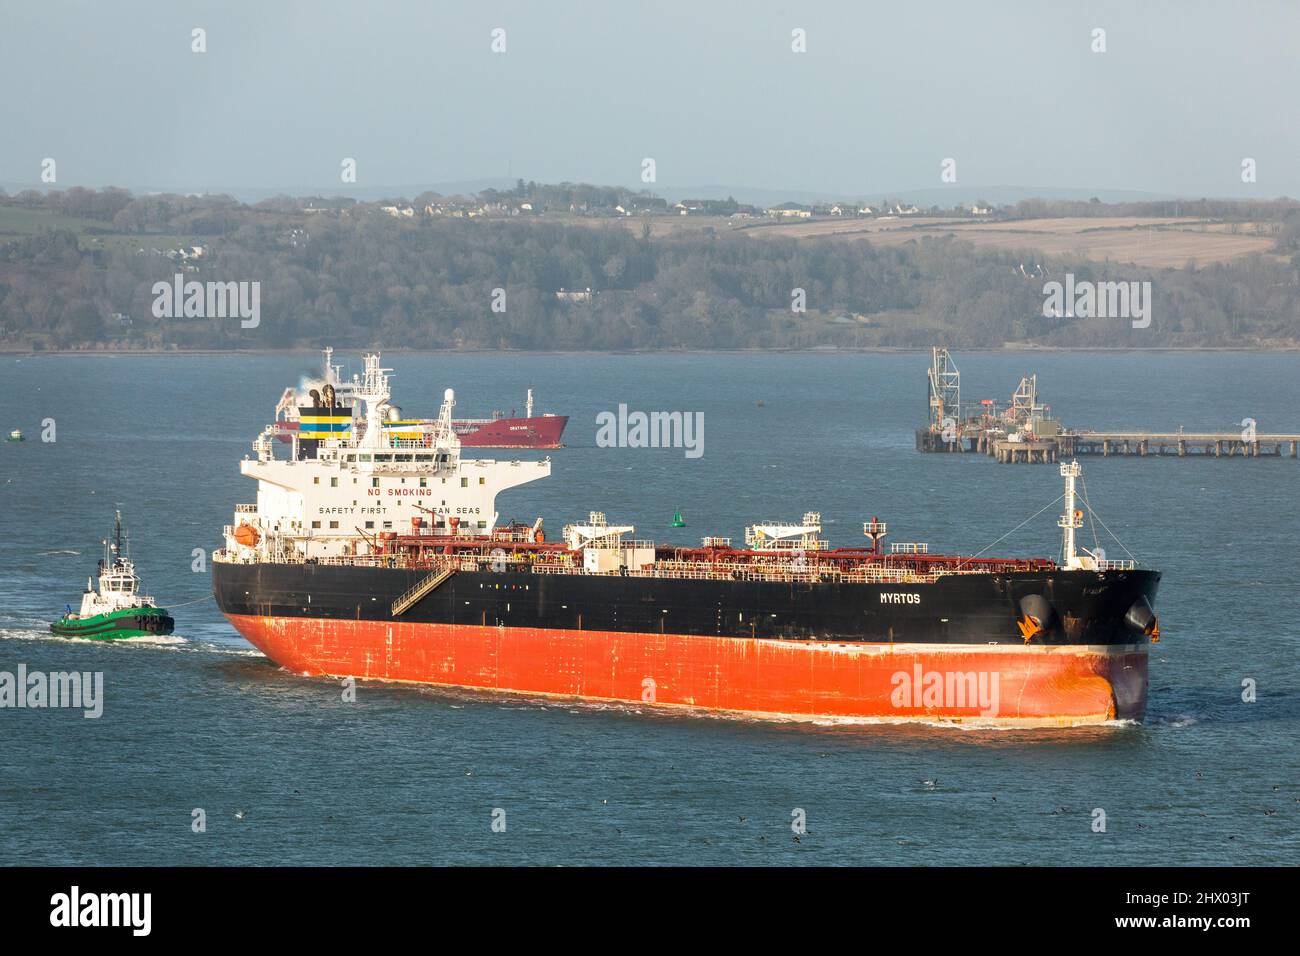 Whitegate, Cork, Ireland. 08th March, 2022. Tugboat DSG Alex escorts  the tanker Myrtos  oil refinery after discharging her cargo of U.S. crude oil at Whitegate, Co. Cork, Ireland - Picture David Creedon Stock Photo